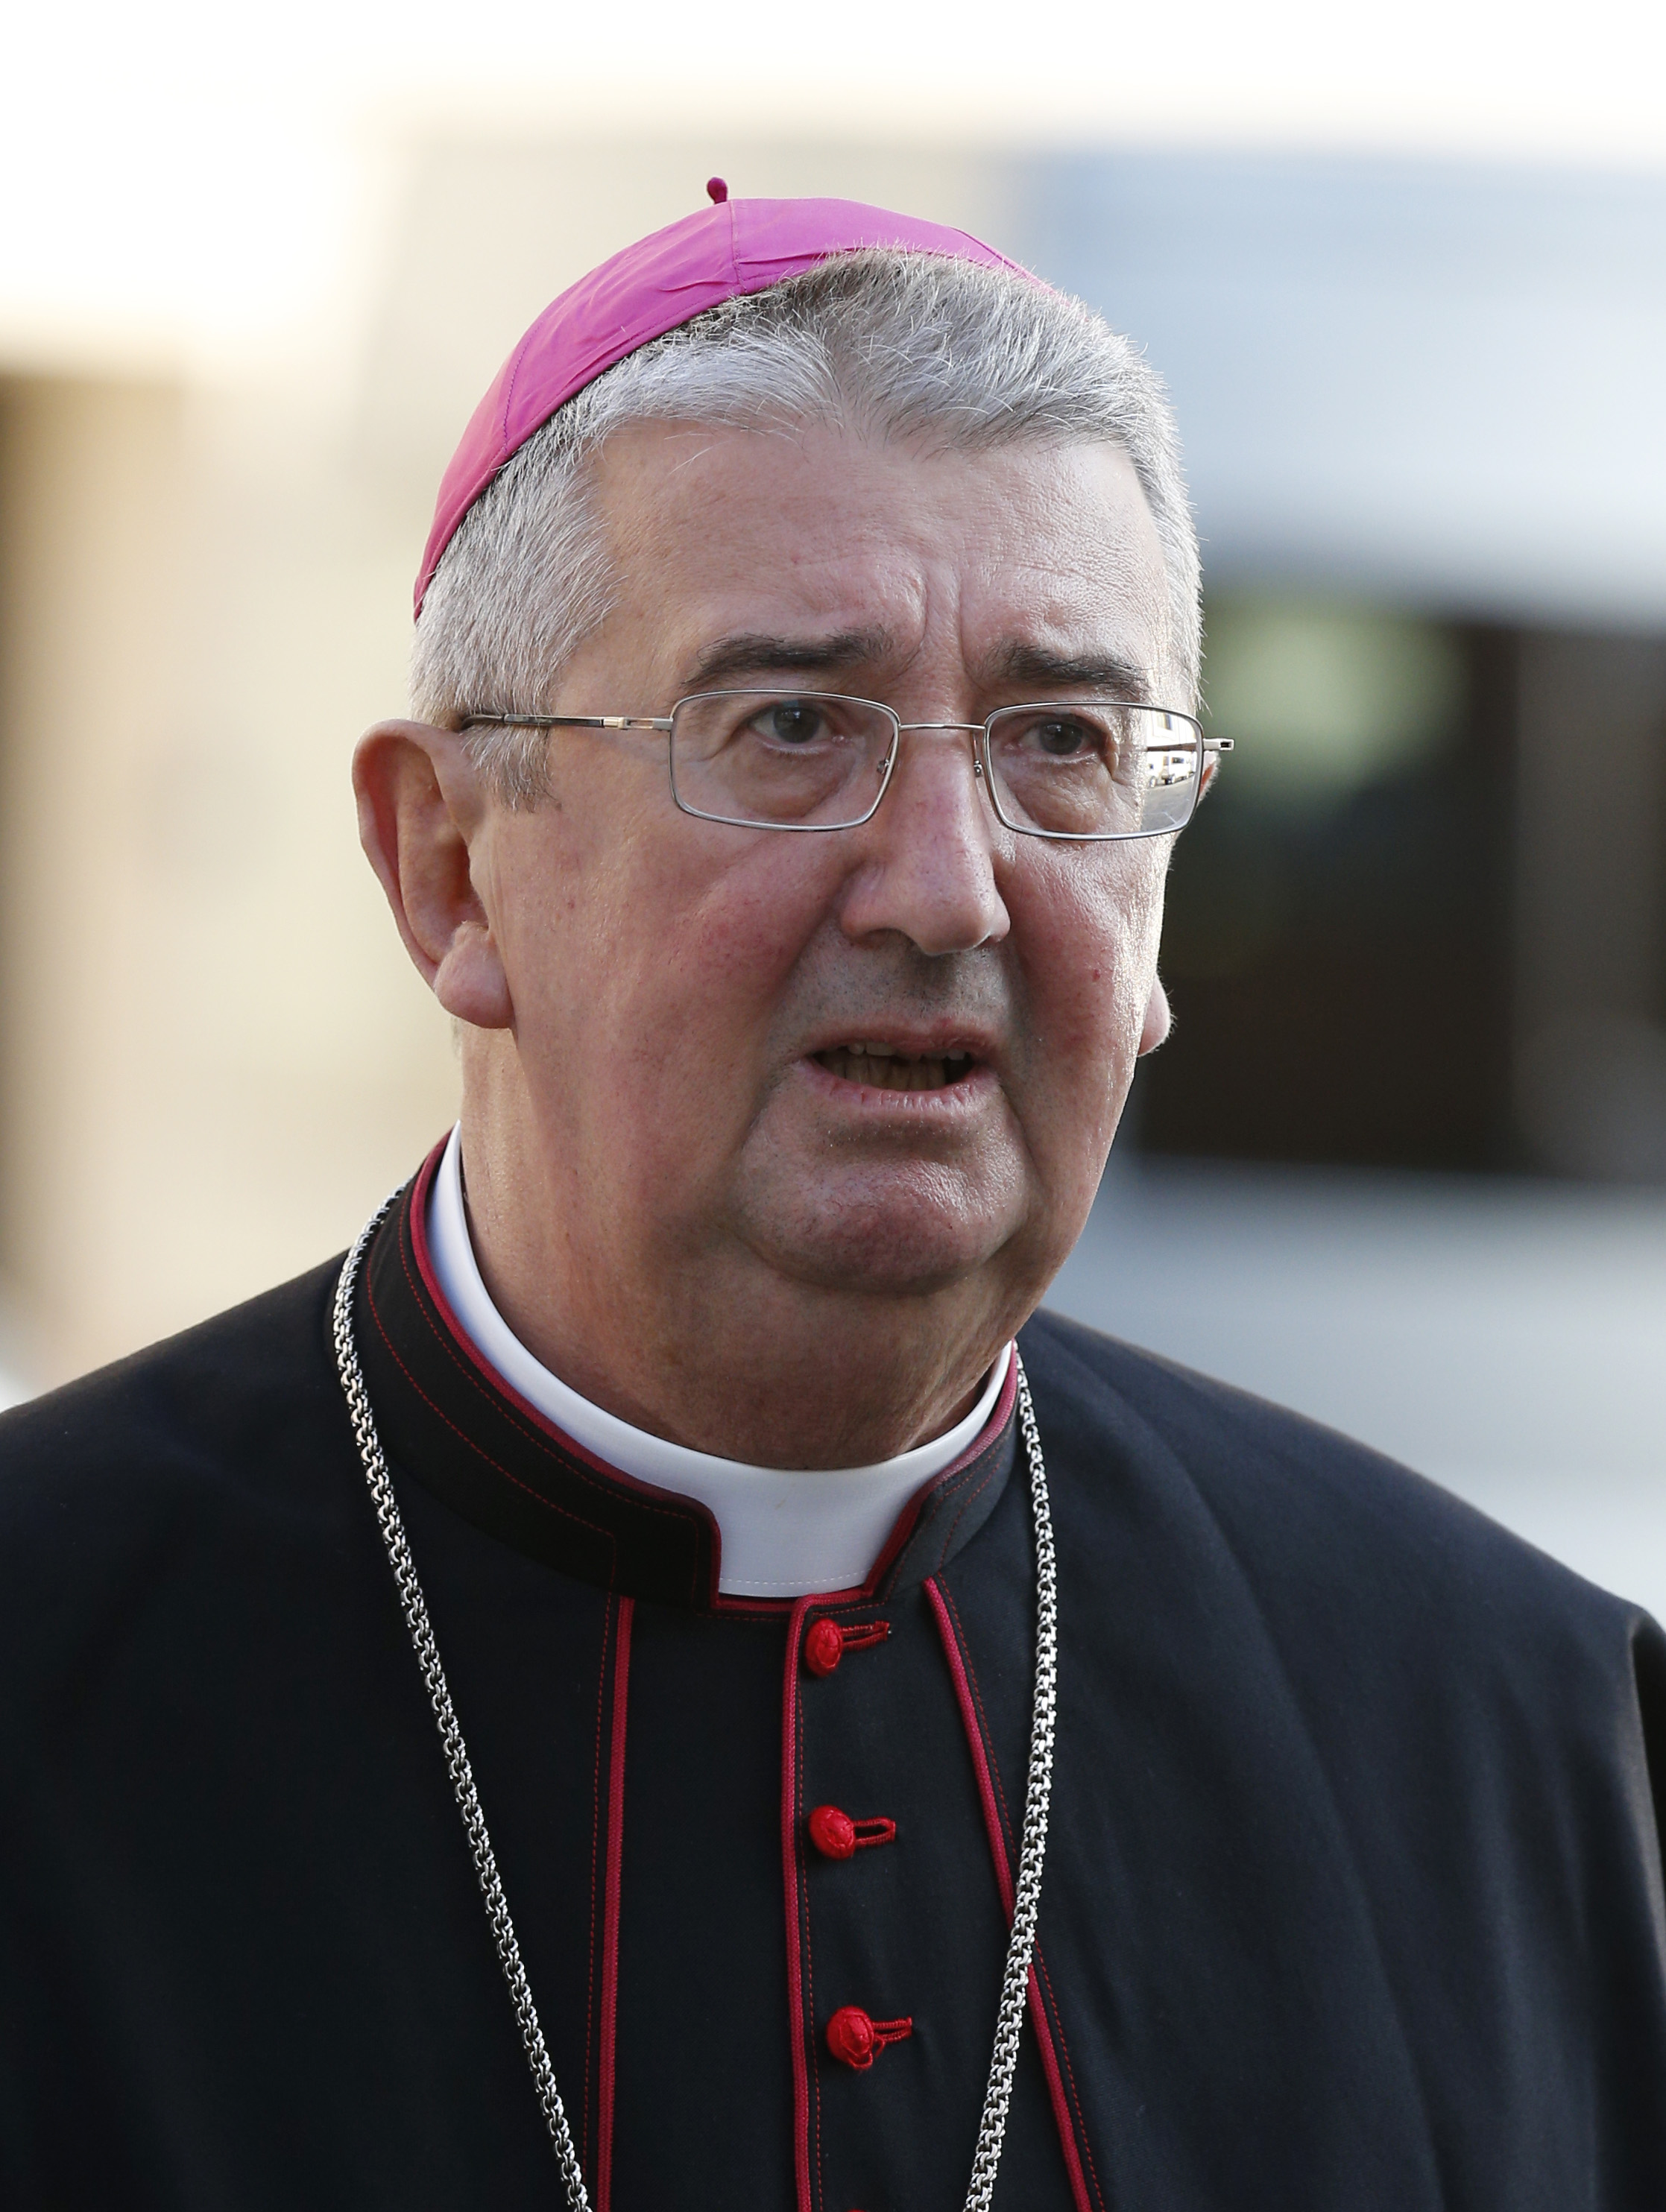 No more ‘show’ funerals for Dublin gang members, says Archbishop